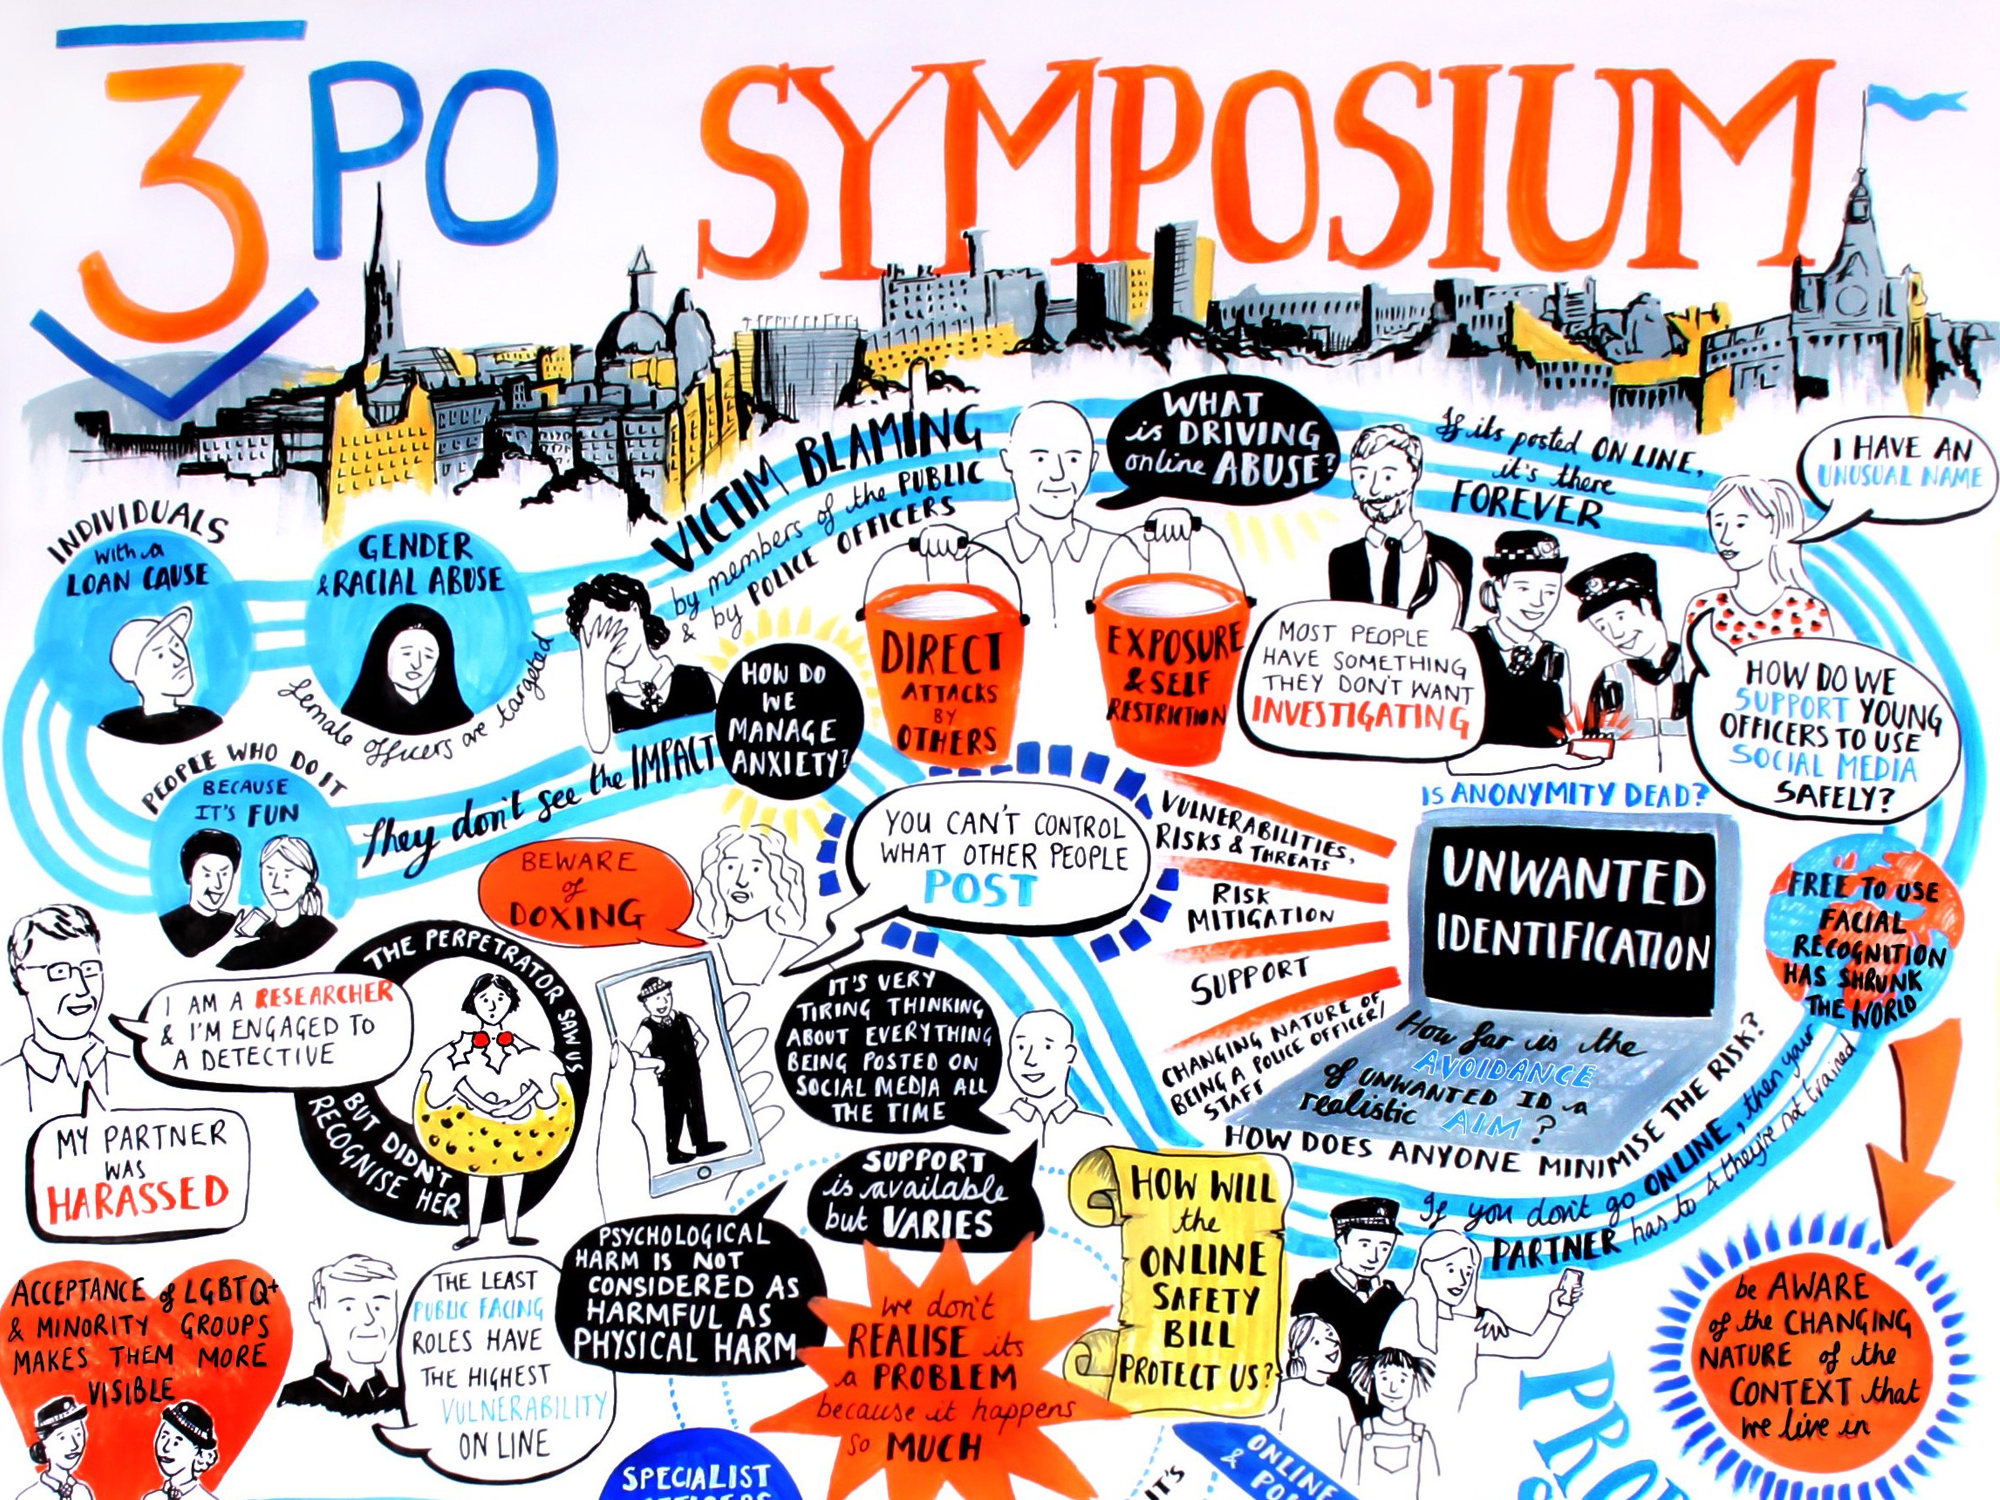 On October 3, 2023, the 3PO Project hosted its first multi-stakeholder symposium in Edinburgh. The symposium was a fantastic opportunity to showcase what the project has achieved to date. Project partners presented research findings that provide much-needed insight into how police officers and staff, as well as their families, are affected by online harms and how they cope with them. The symposium was also an opportunity to explore solutions to online harms, ranging from policy guidance to training and prop